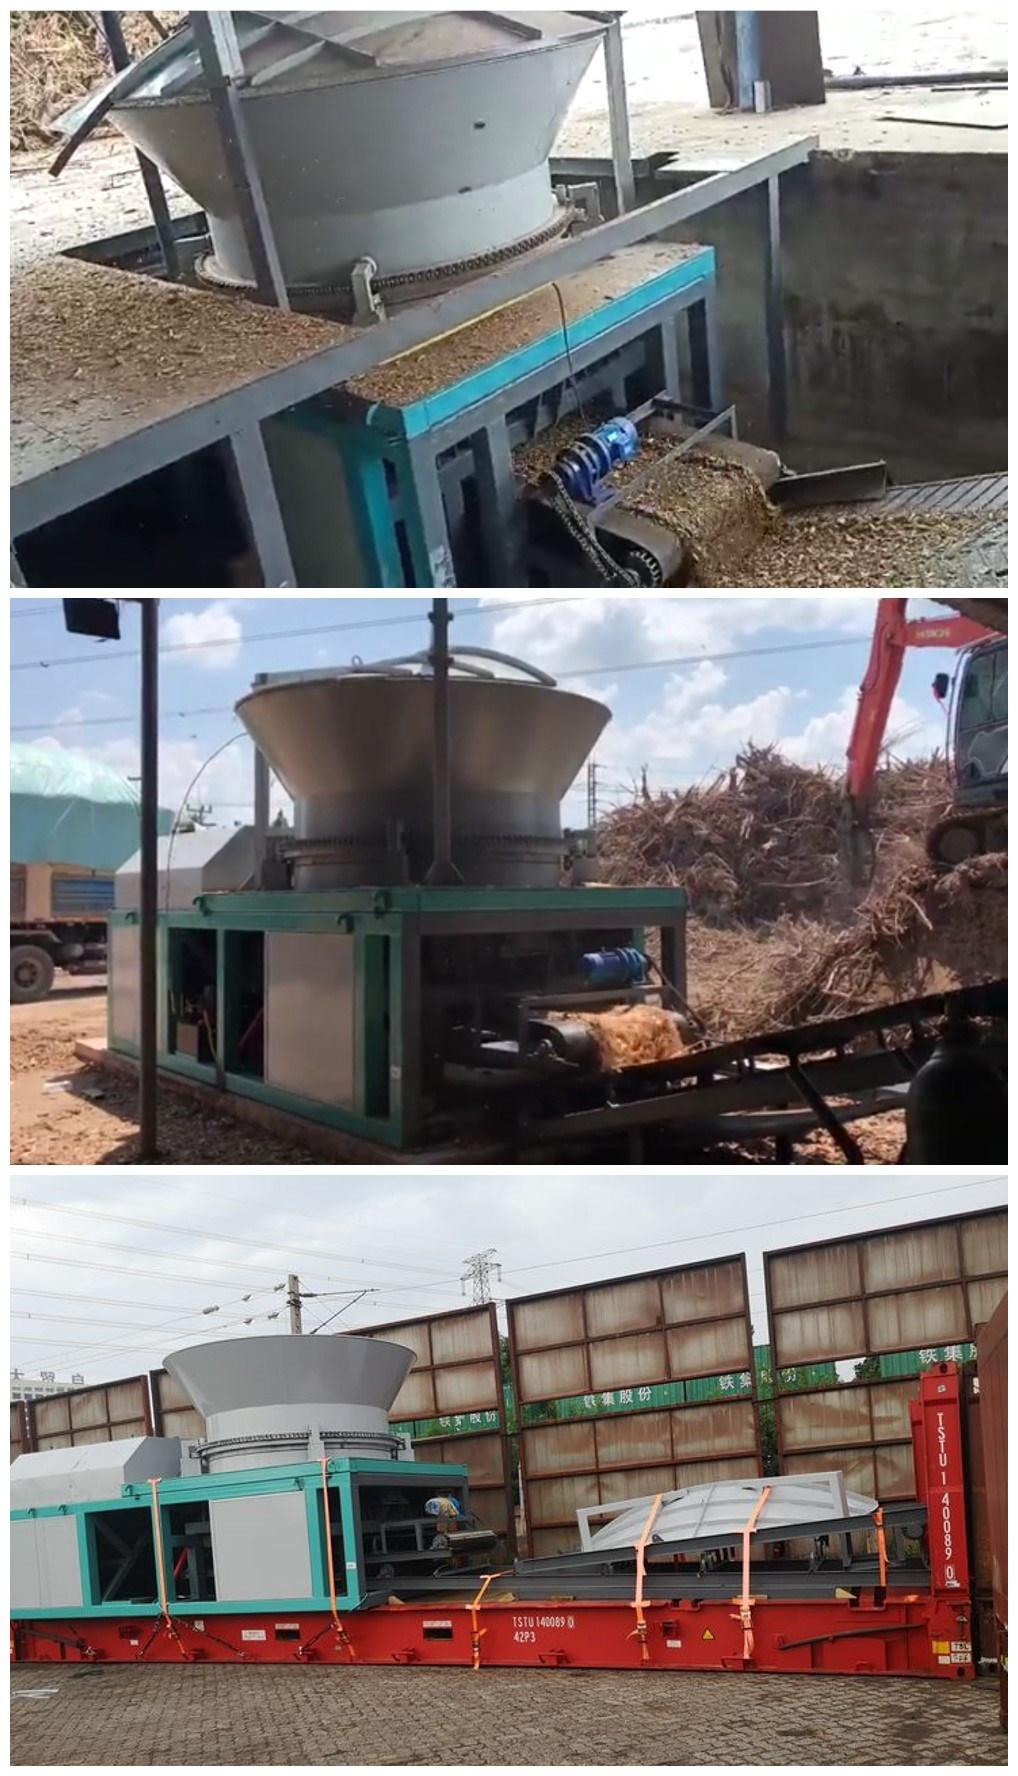 Shd Commercial Hot-Selling Electric Disc-Type Root Wood Crusher